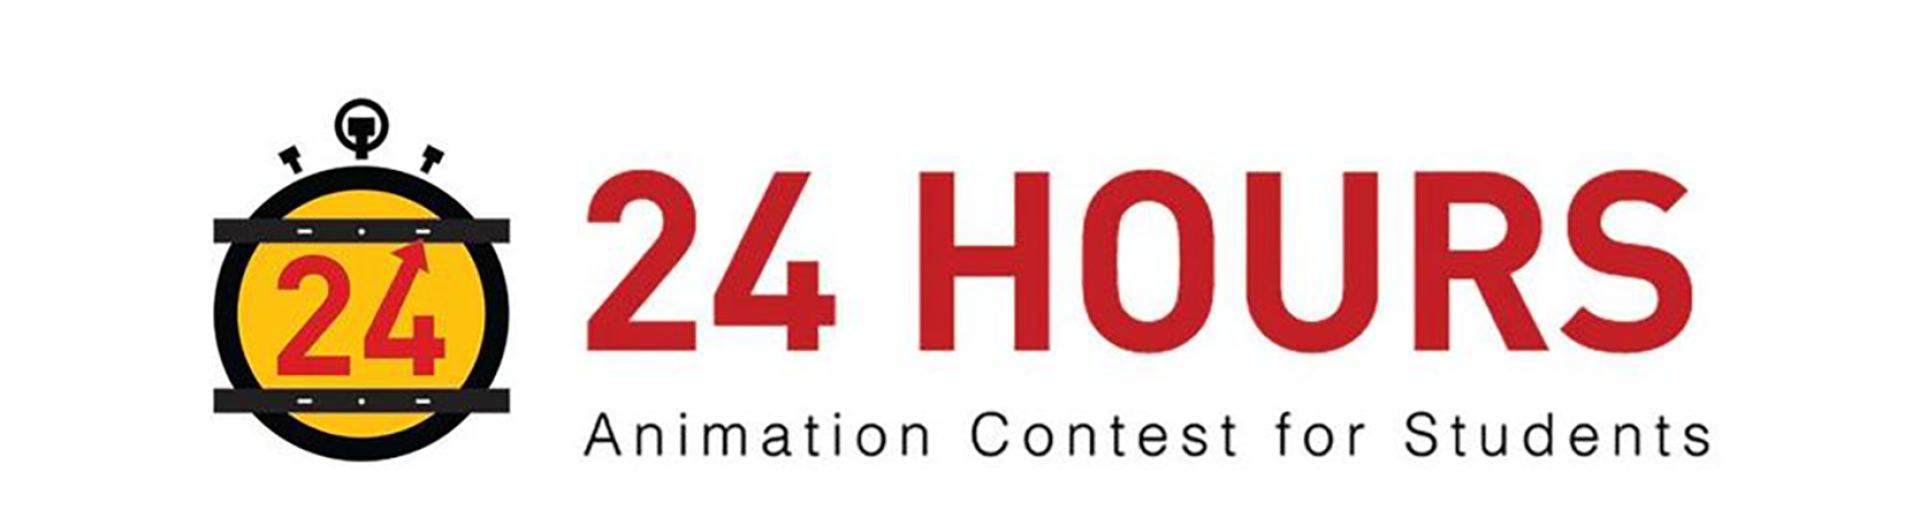 24Hour Animation Contest is coming back for its 21st year